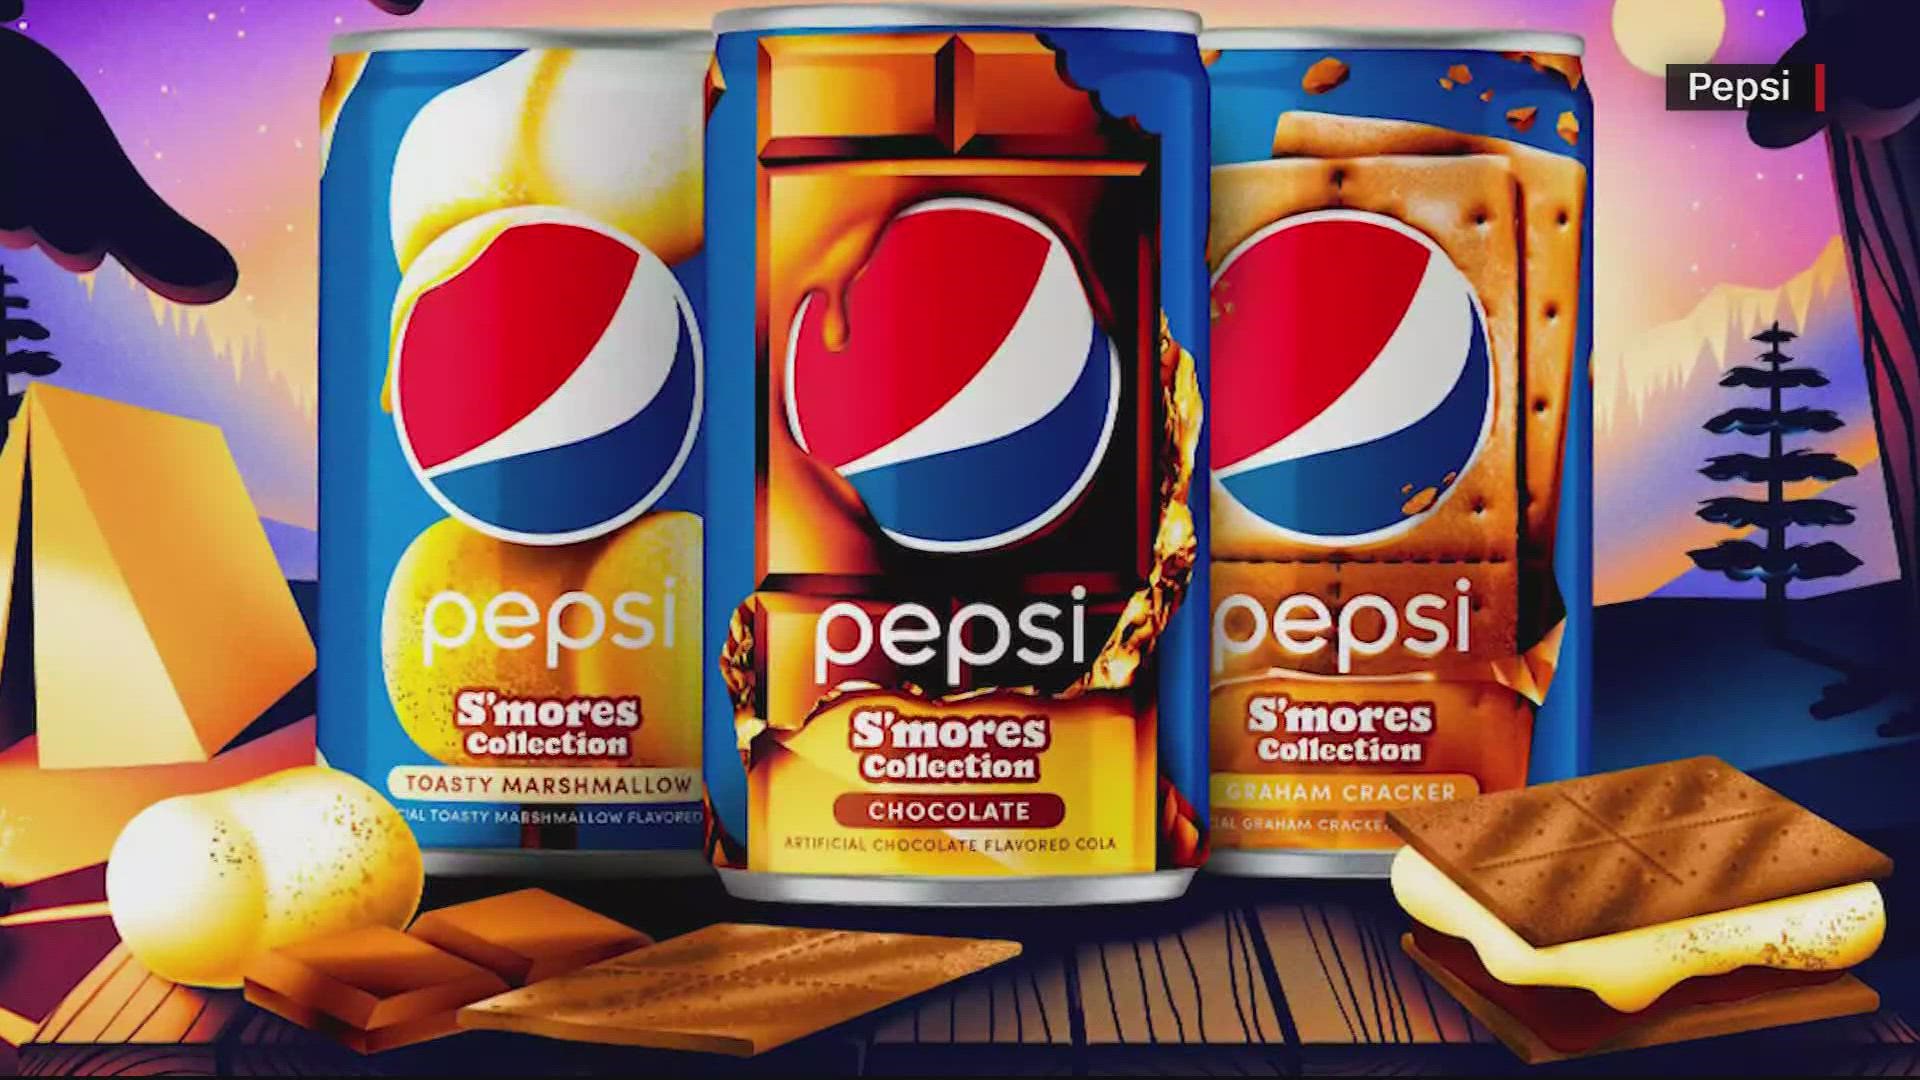 Pepsi is adding it's own twist on the camp fire favorite.